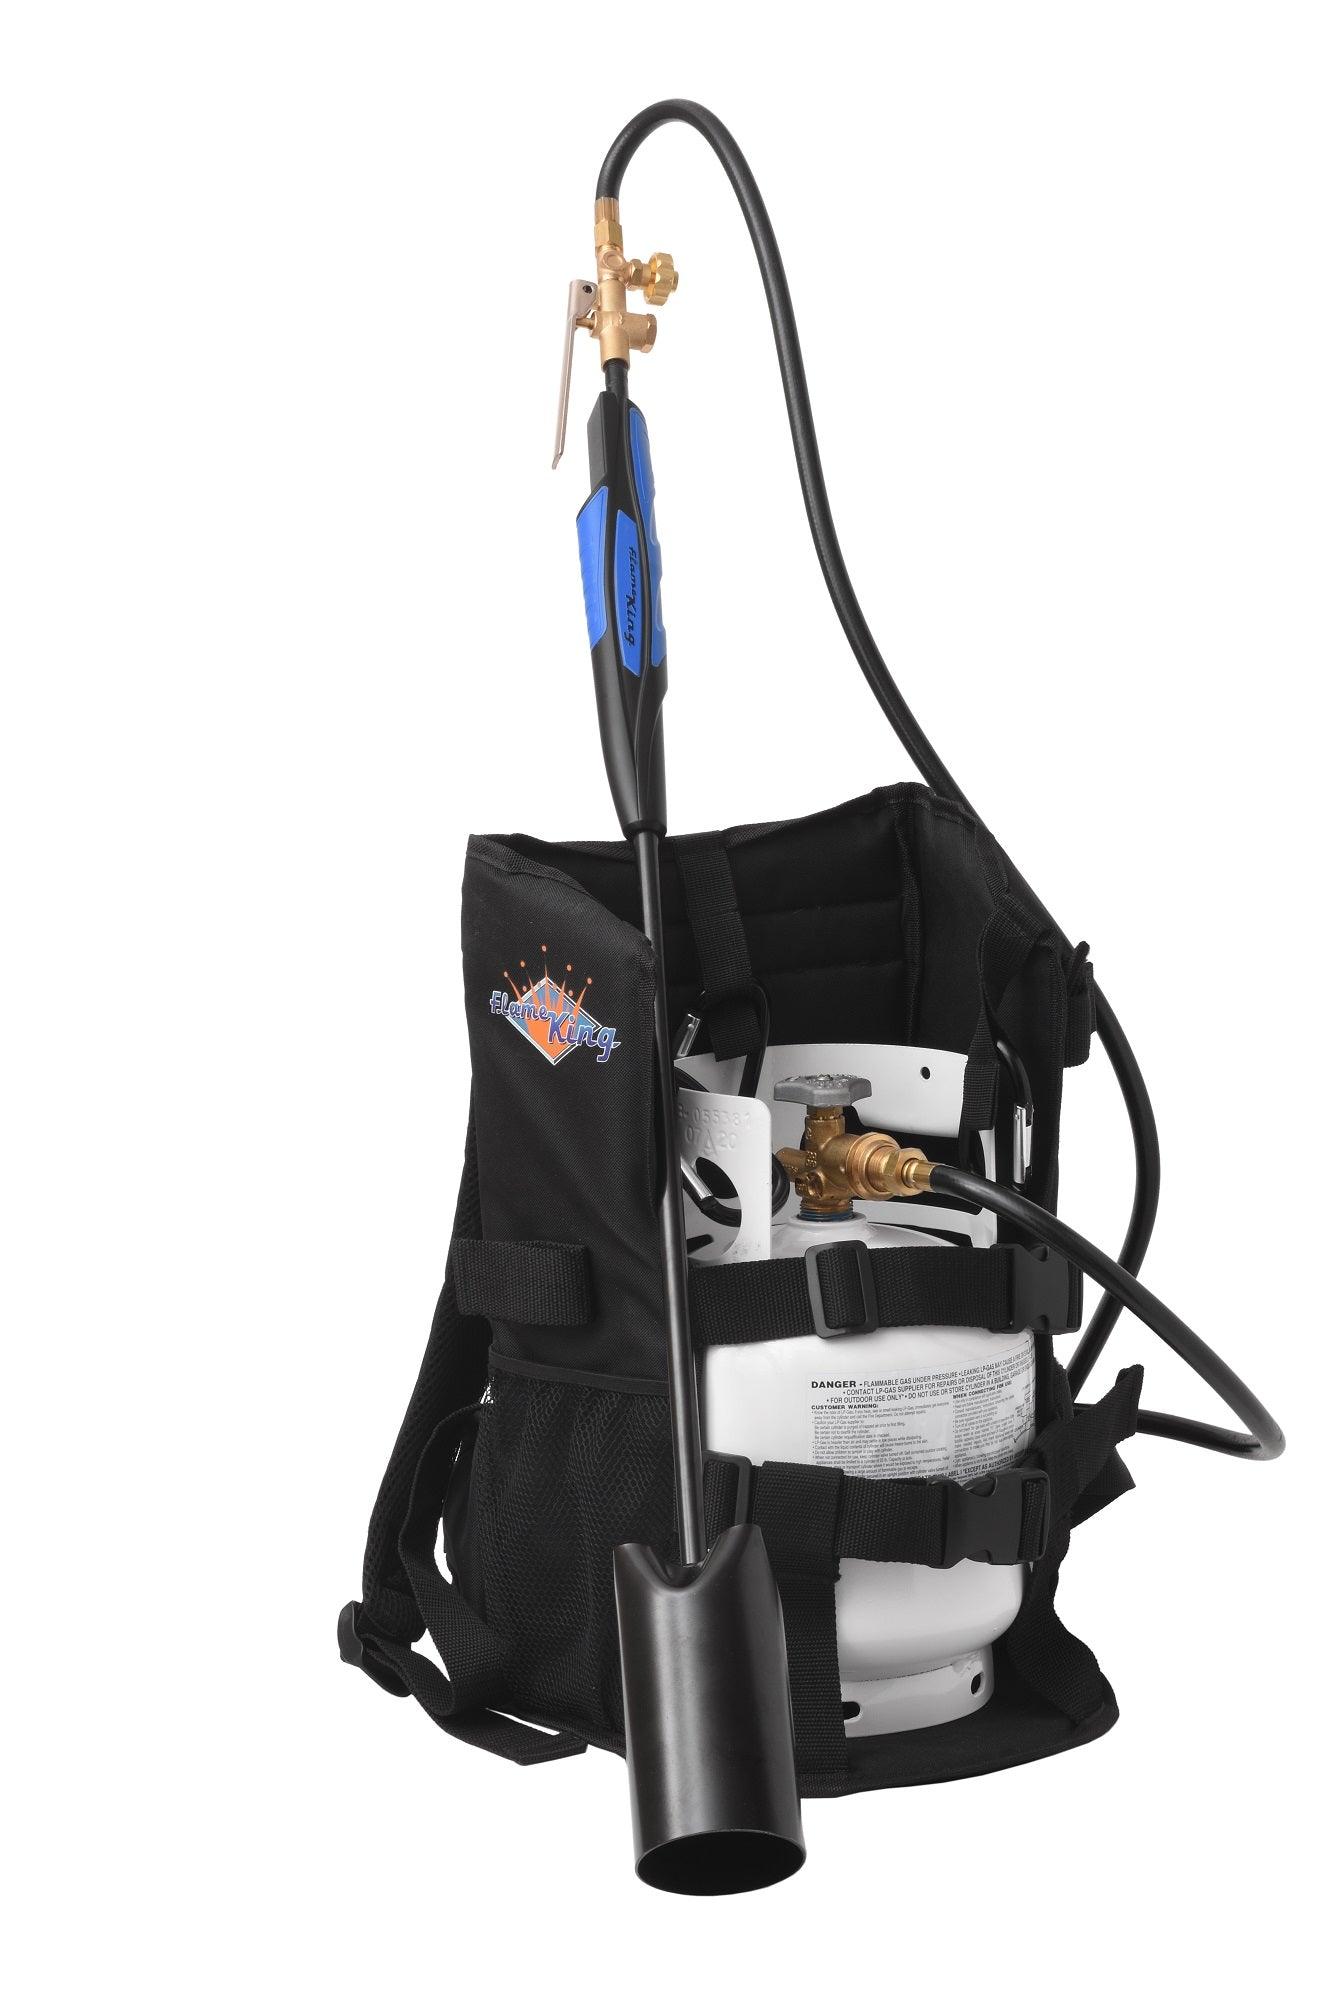 Flame King Weed Burner Torch Backpack for 10LB or 5lb Propane Tank - Flame King